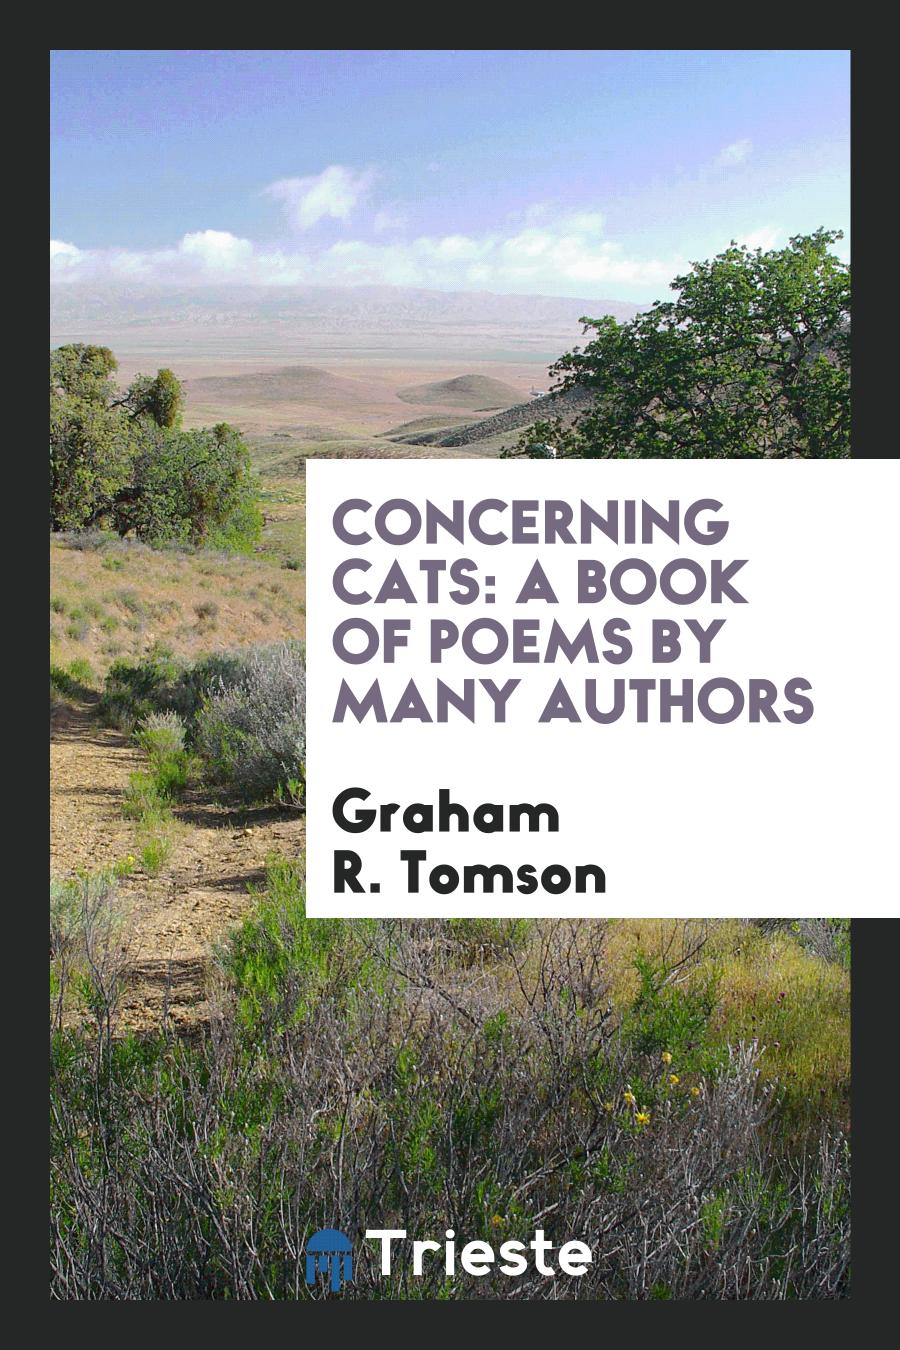 Concerning Cats: A Book of Poems by Many Authors